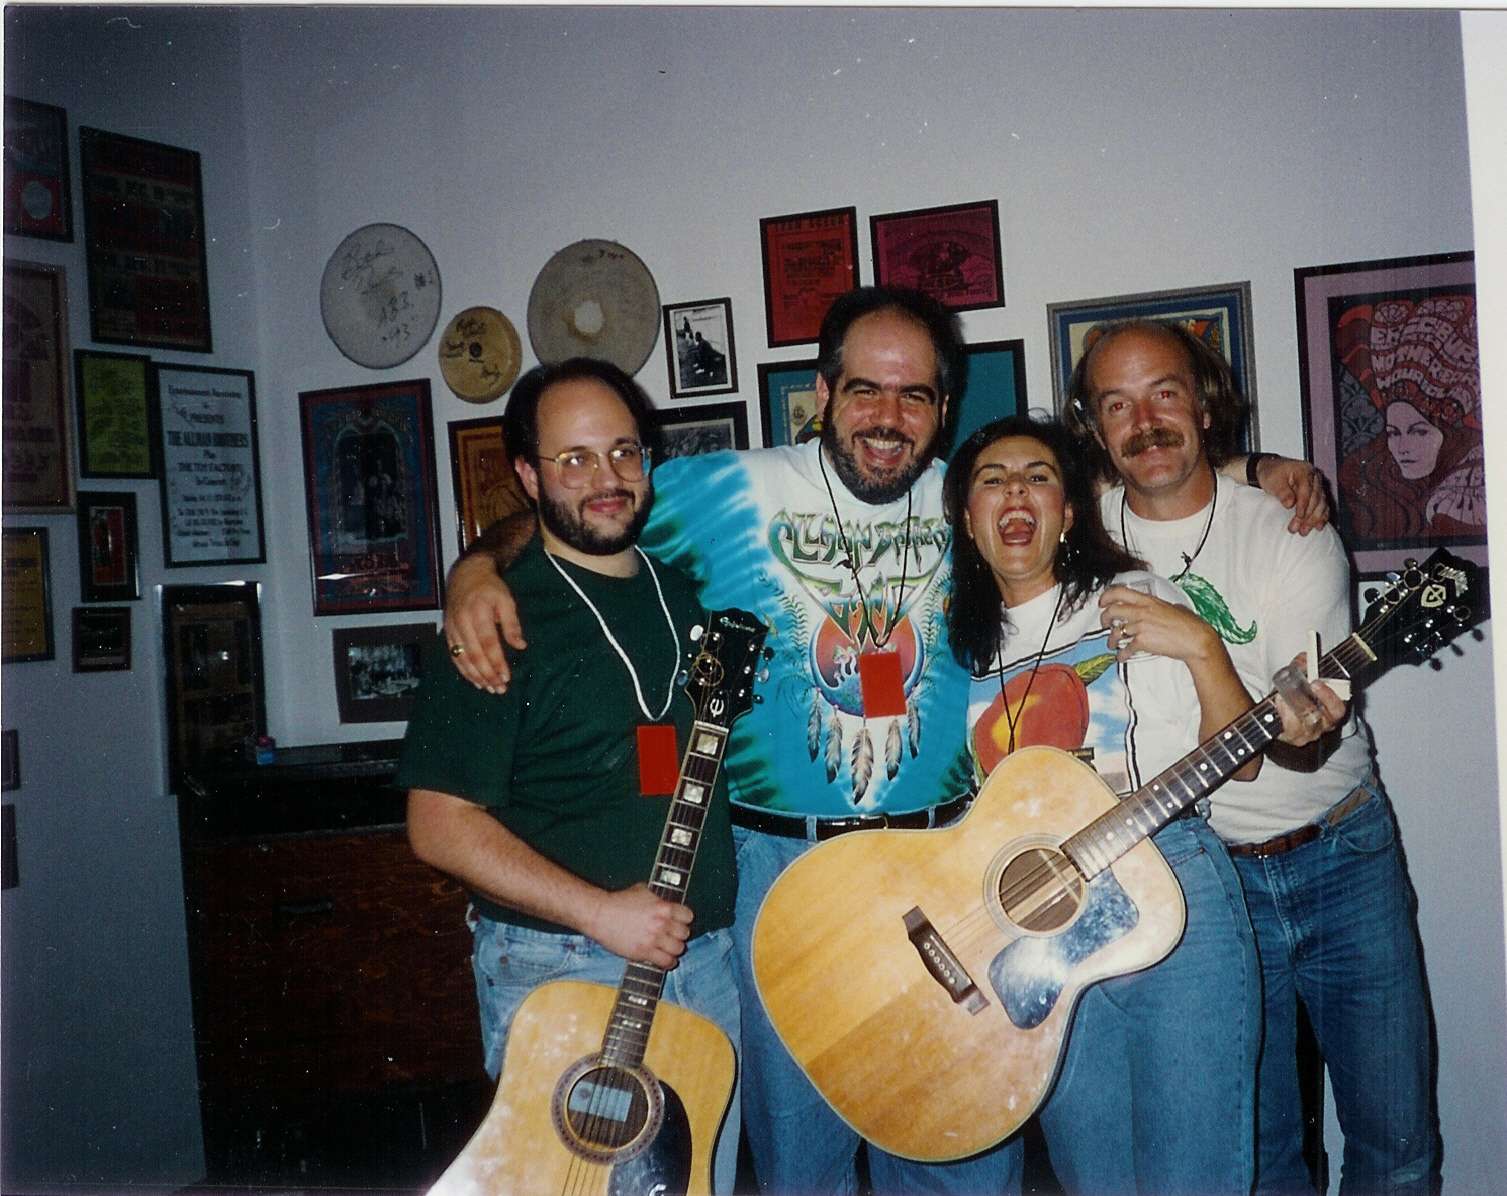 Marty, Mike, Terry & Bill Ector jamming at the Big House in 1992.